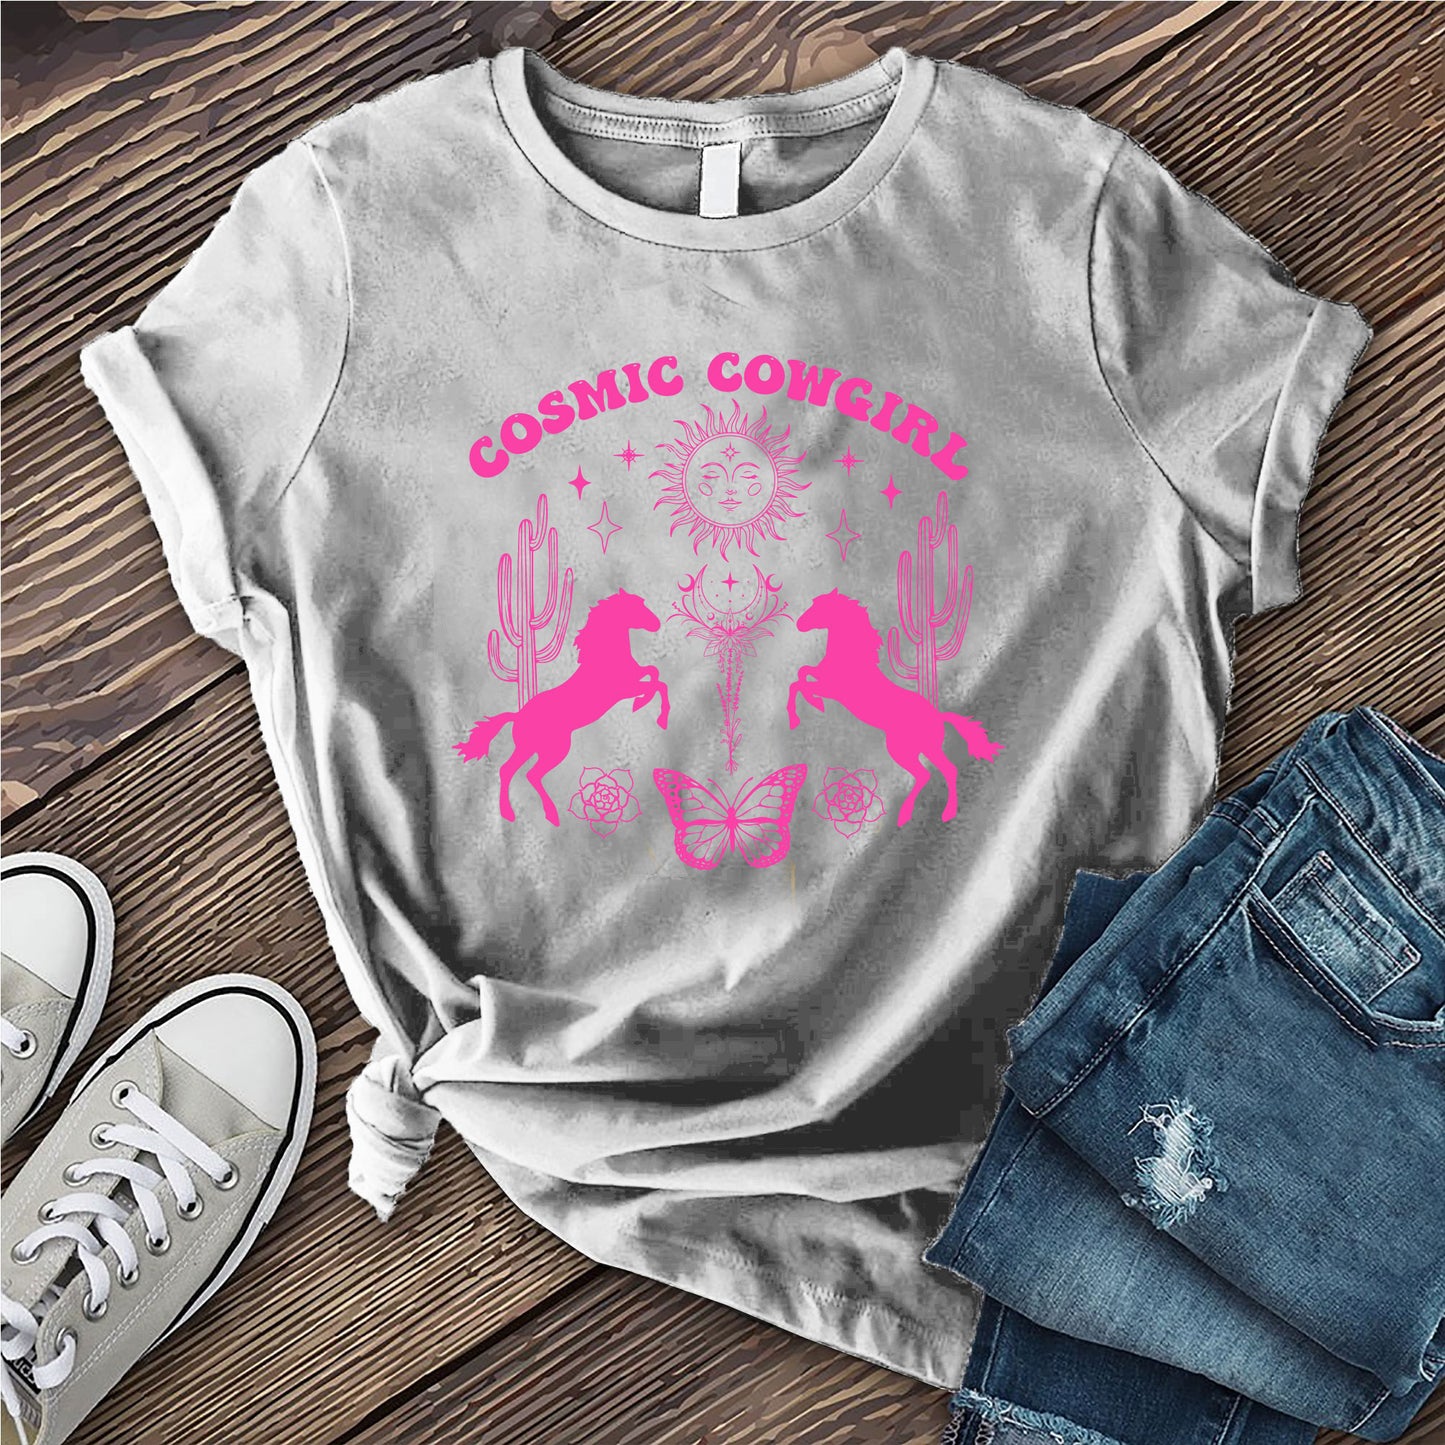 Artifacts of Cosmic Cowgirl T-Shirt